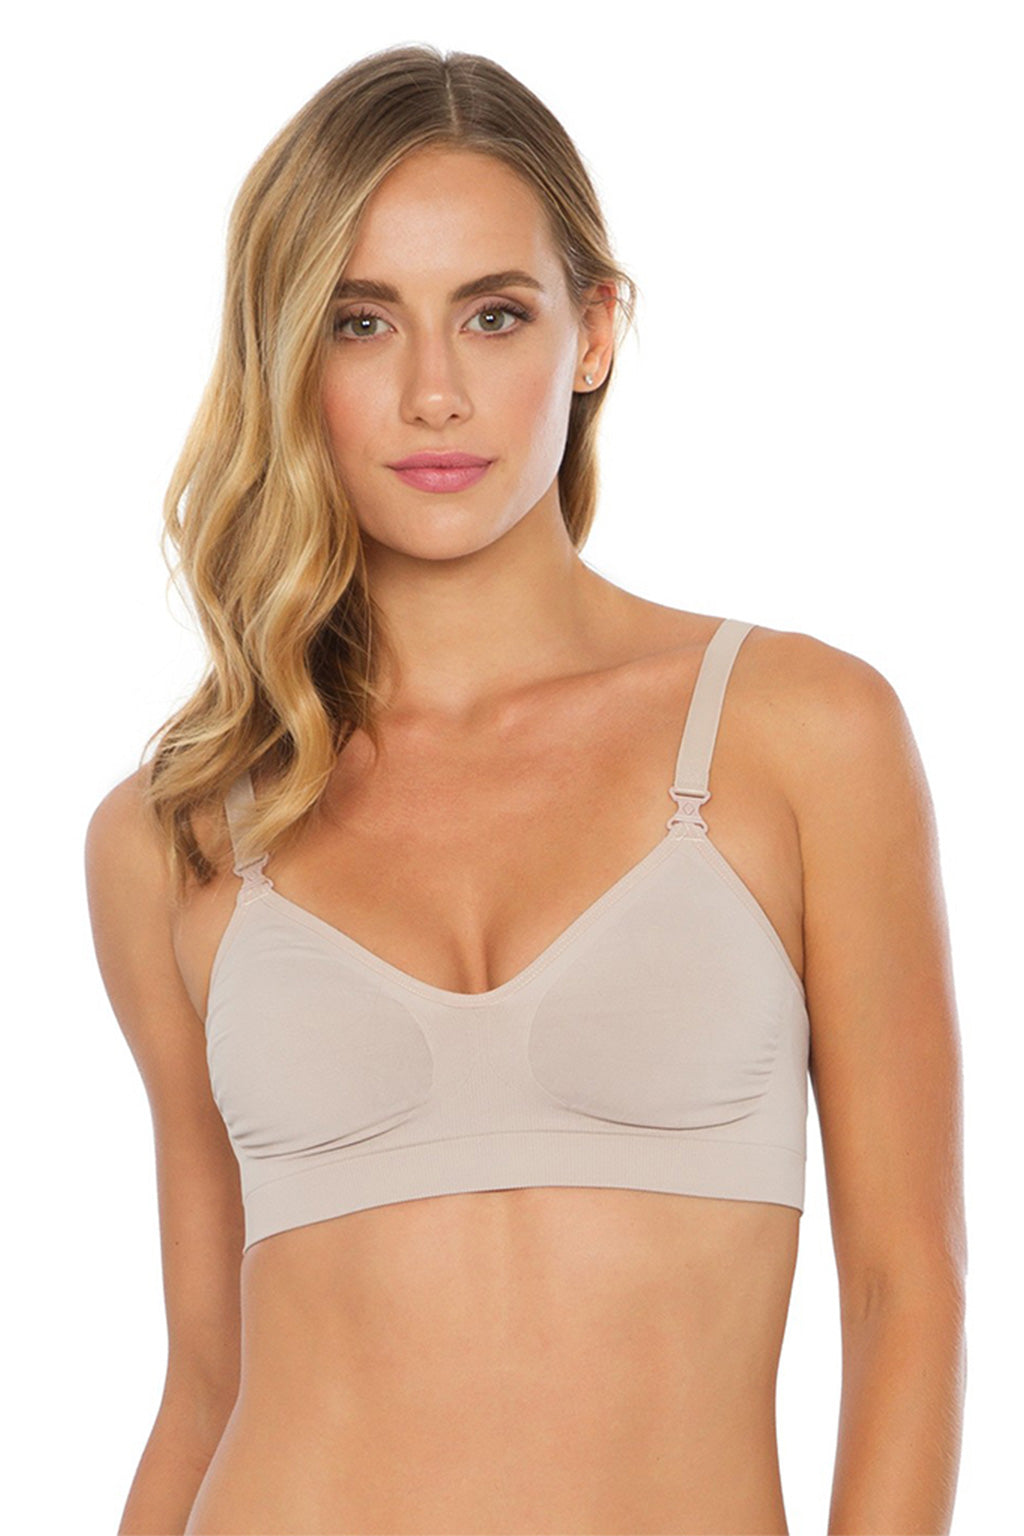 COMPRESSION Aesthetic Bra for External Prosthesis